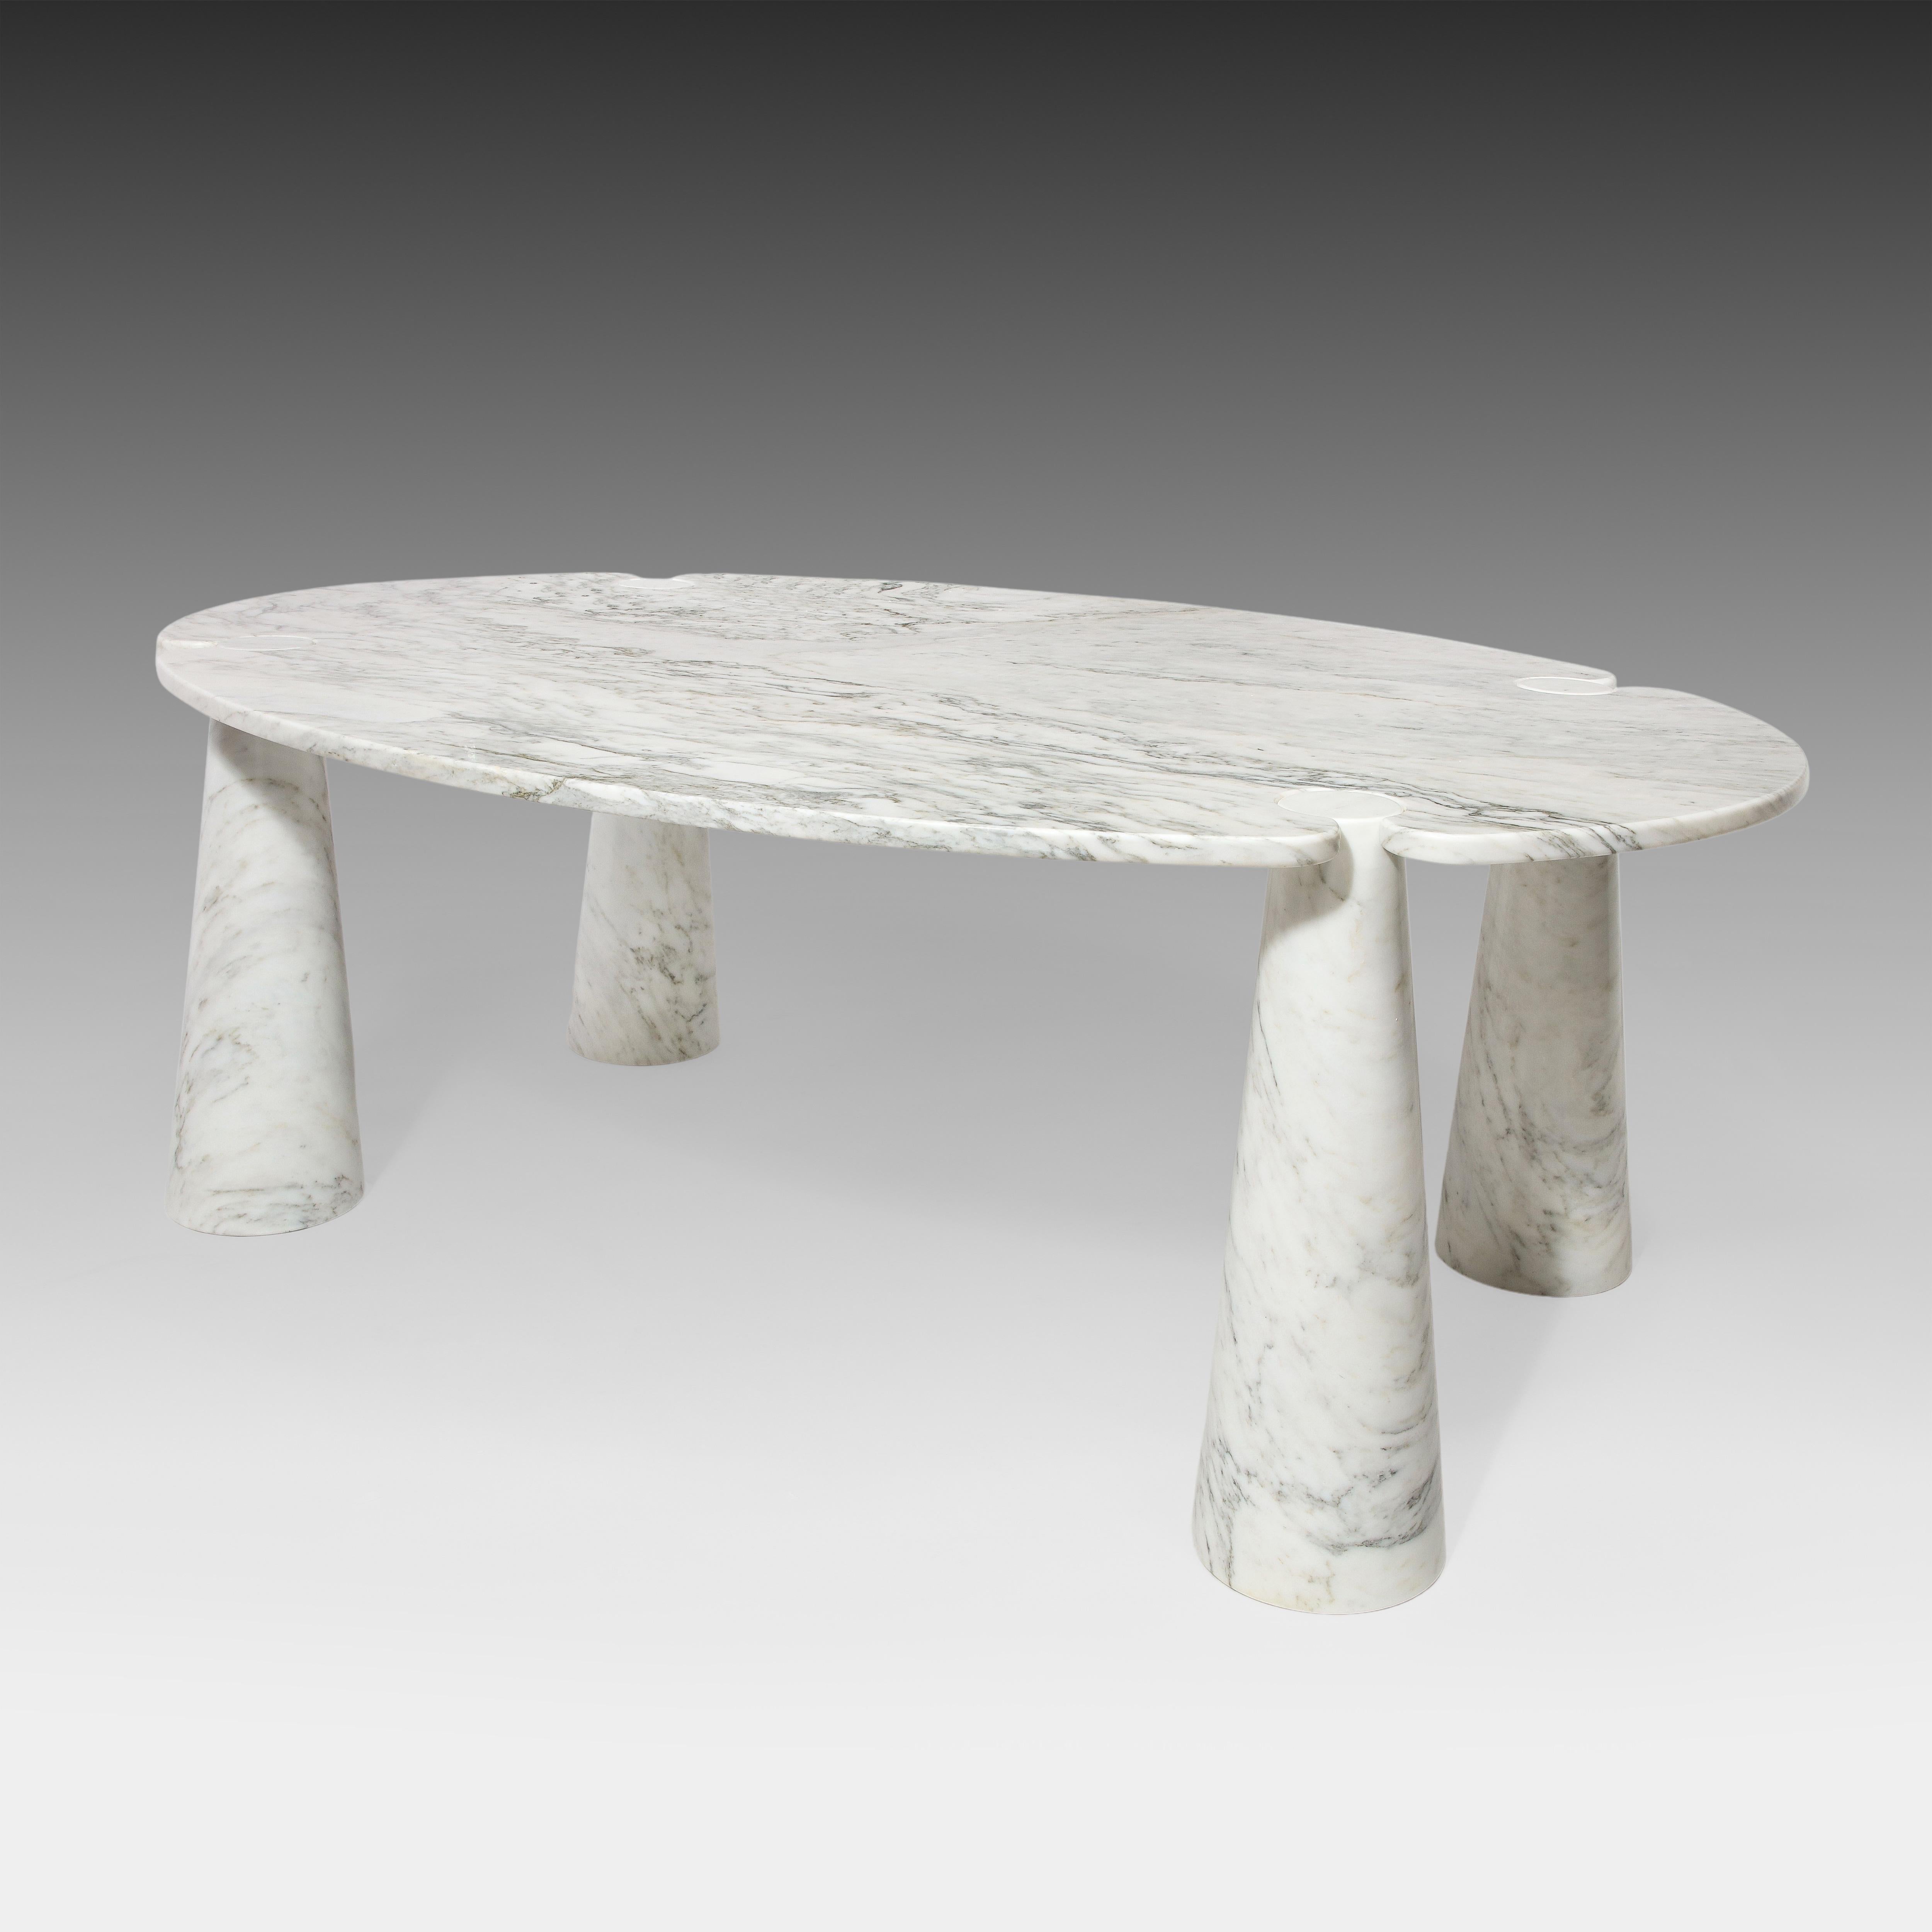 Mid-Century Modern Angelo Mangiarotti for Skipper Carrara Marble Dining Table from Eros Series 1971 For Sale